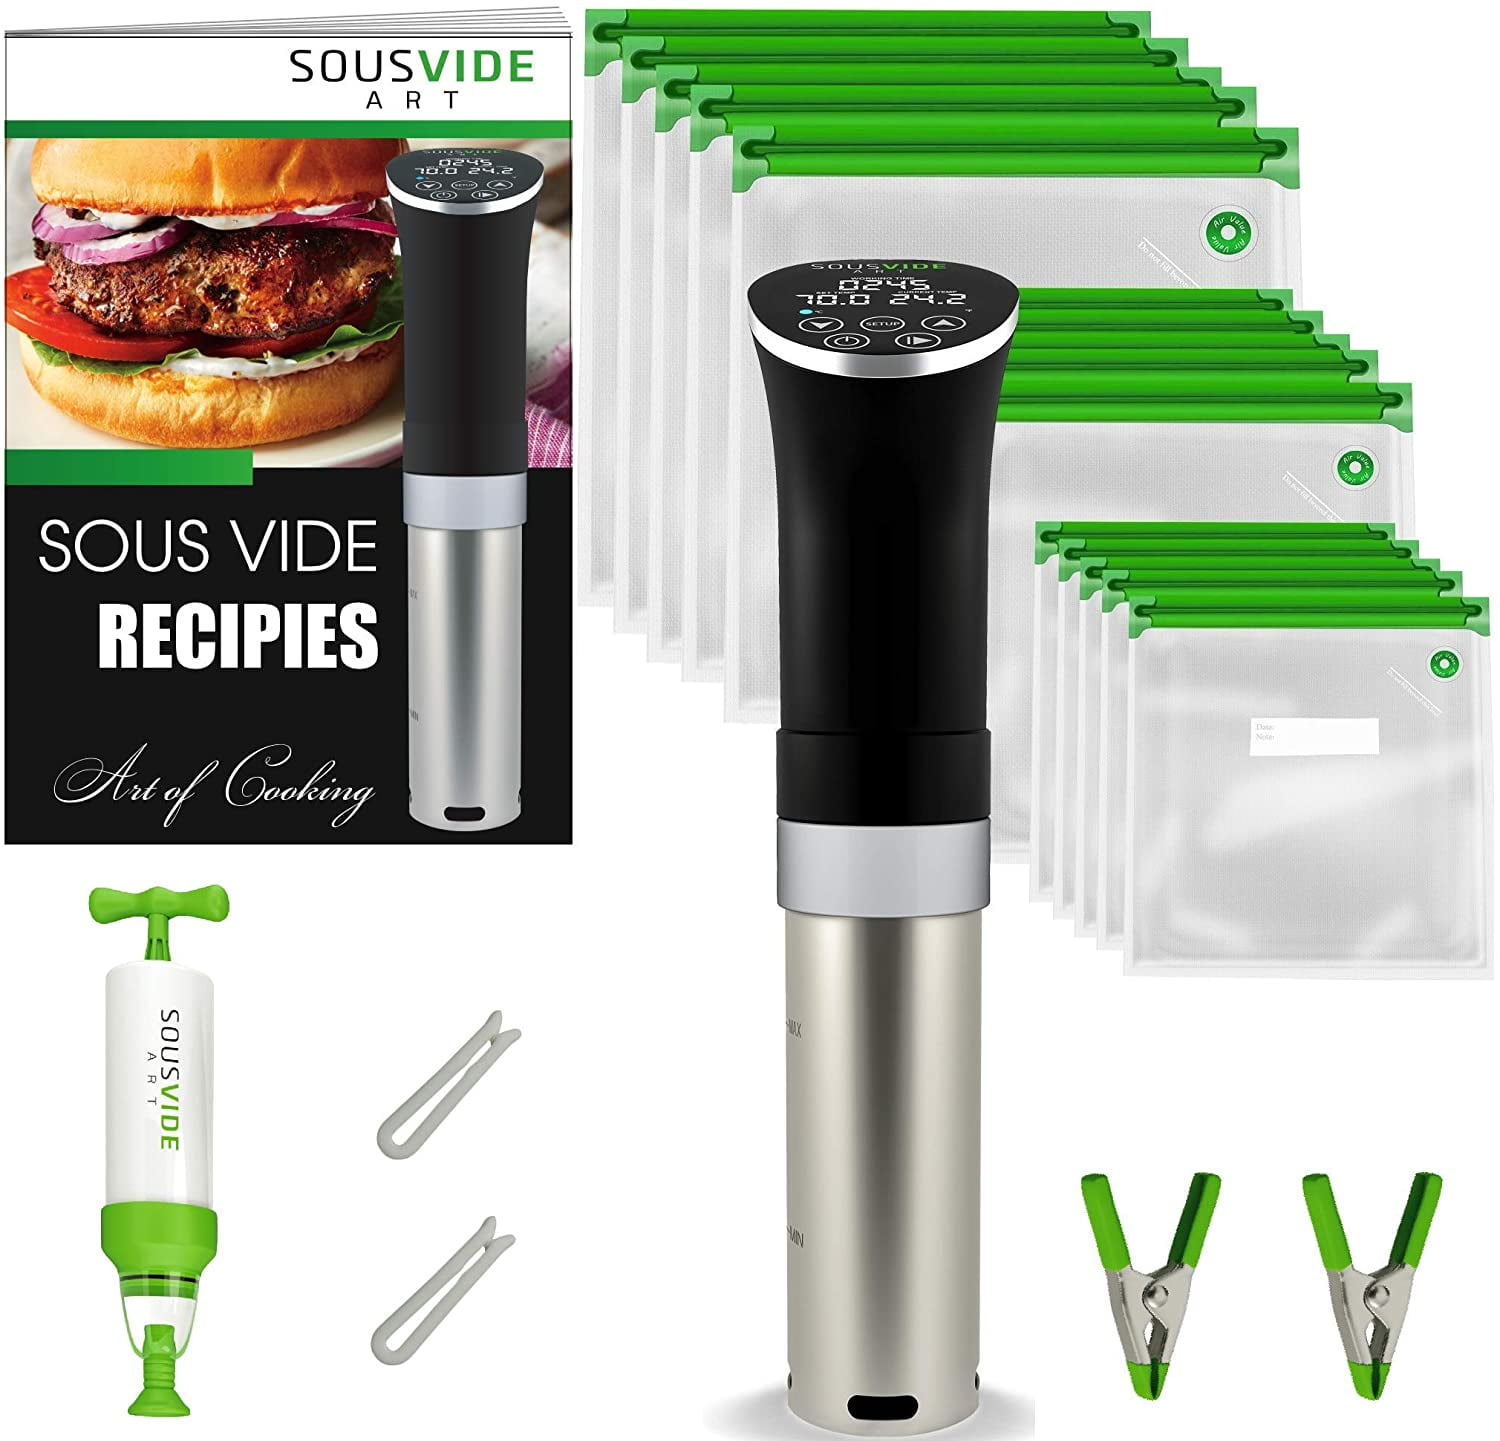 VacPak-It SV158 21.1 Gallon Sous Vide Immersion Circulator Head with LCD  Display- 120V, 1800W